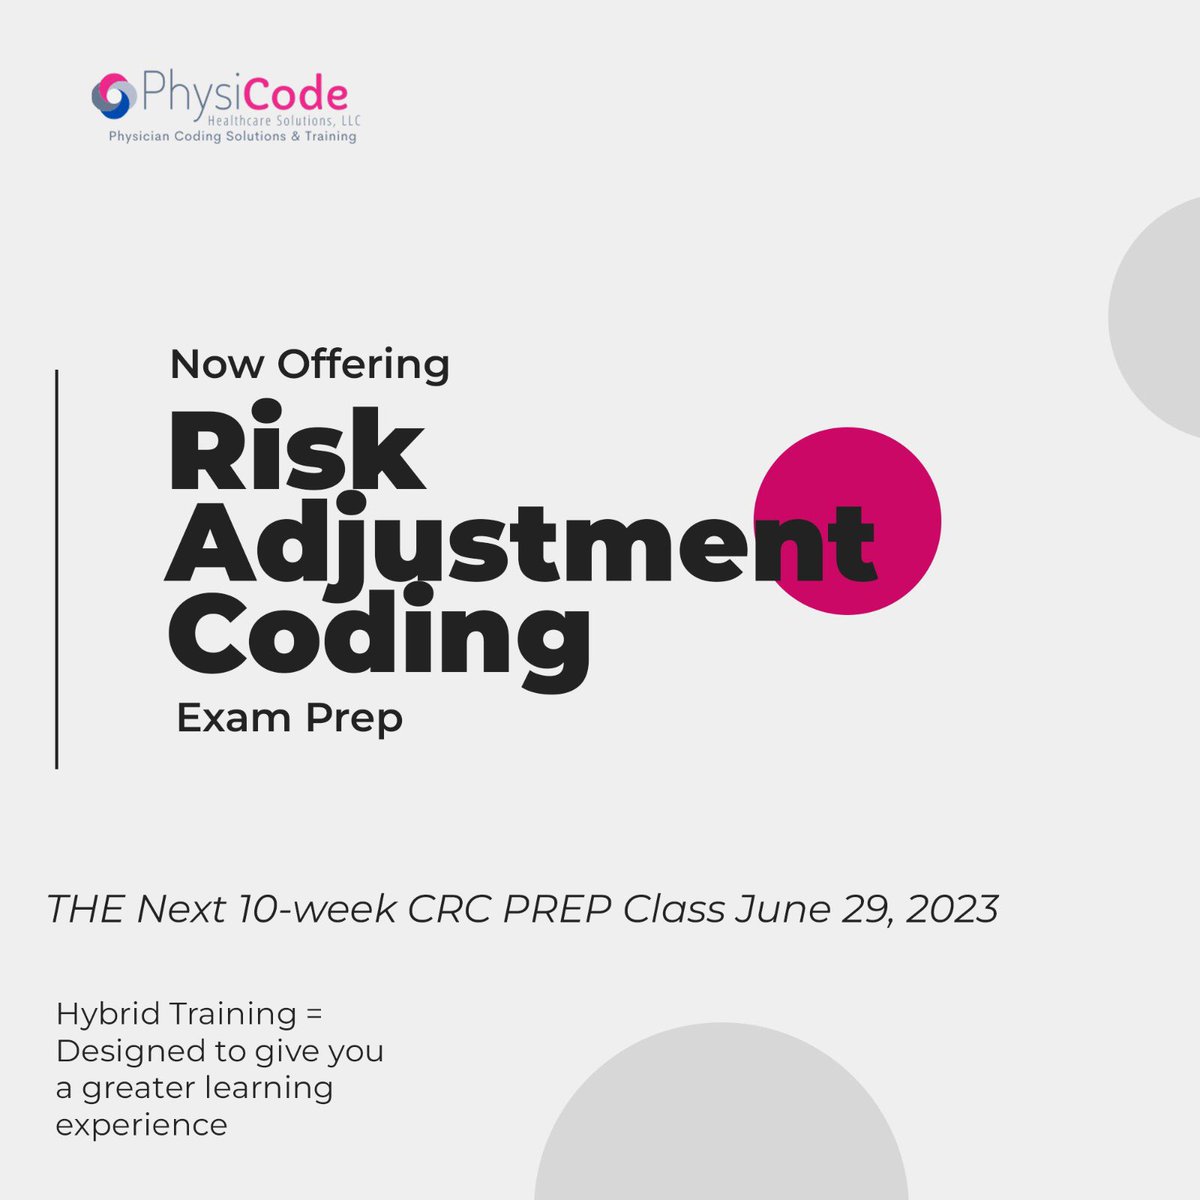 THE Next 10-week CRC PREP Class 
June 29, 2023
Thursdays, 7:00 pm - 9:00 pm Eastern Time
.
#CRC #medicalbilling #healthcare #doctors #medical #coding #physician #icd #aapc #medicalcoder #practicemanagement #medicalbillingandcoding #revenuecyclemanagement #cpc #ehr #billingexperts